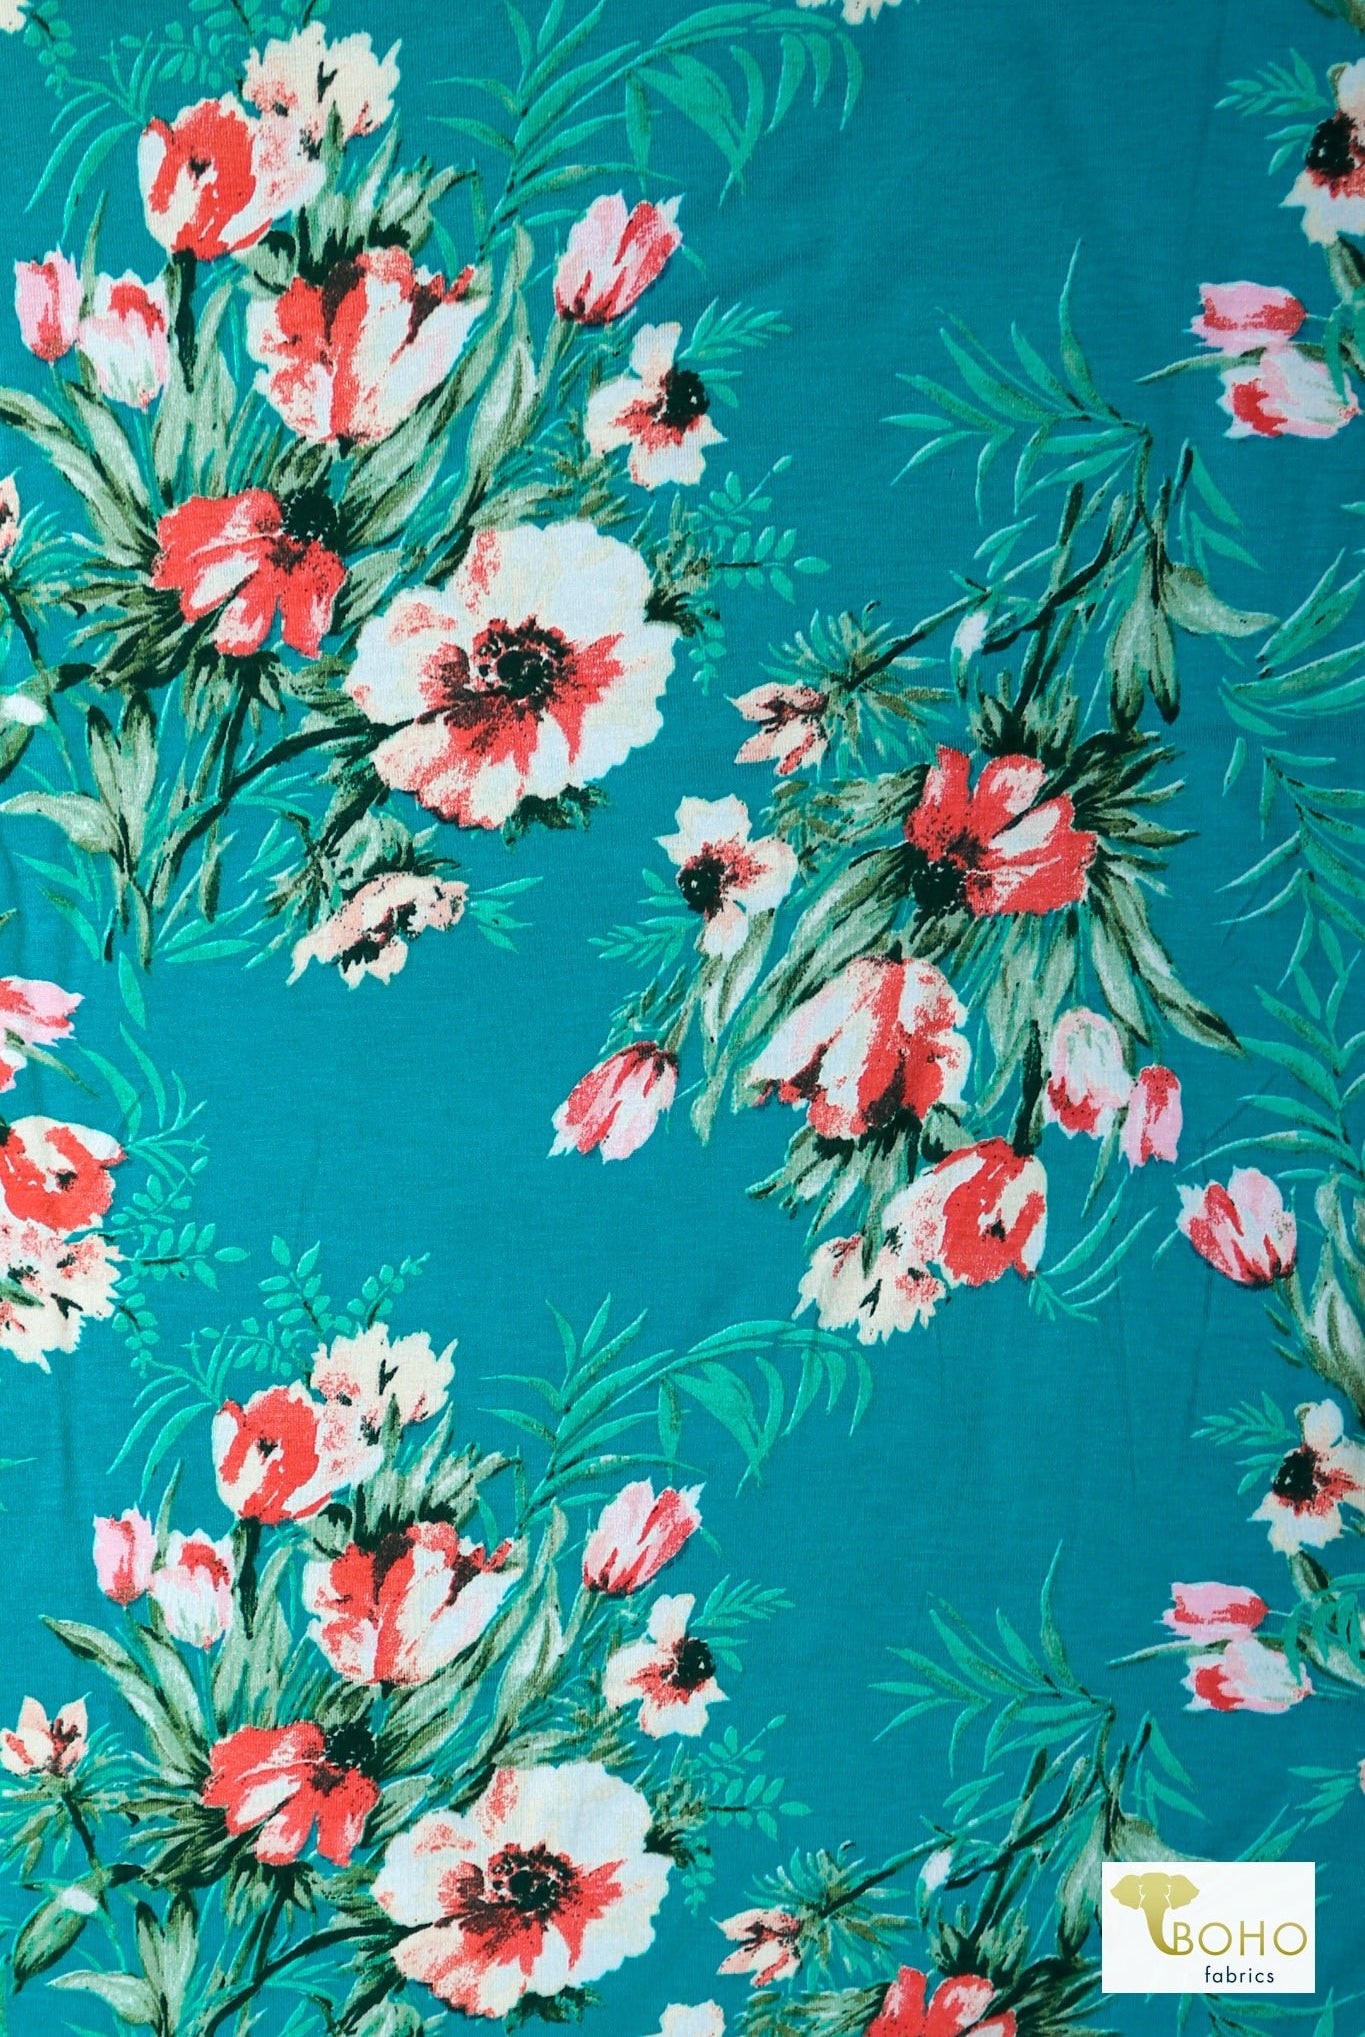 Turquoise Floral Delight, Rayon Spandex Knit - Boho Fabrics